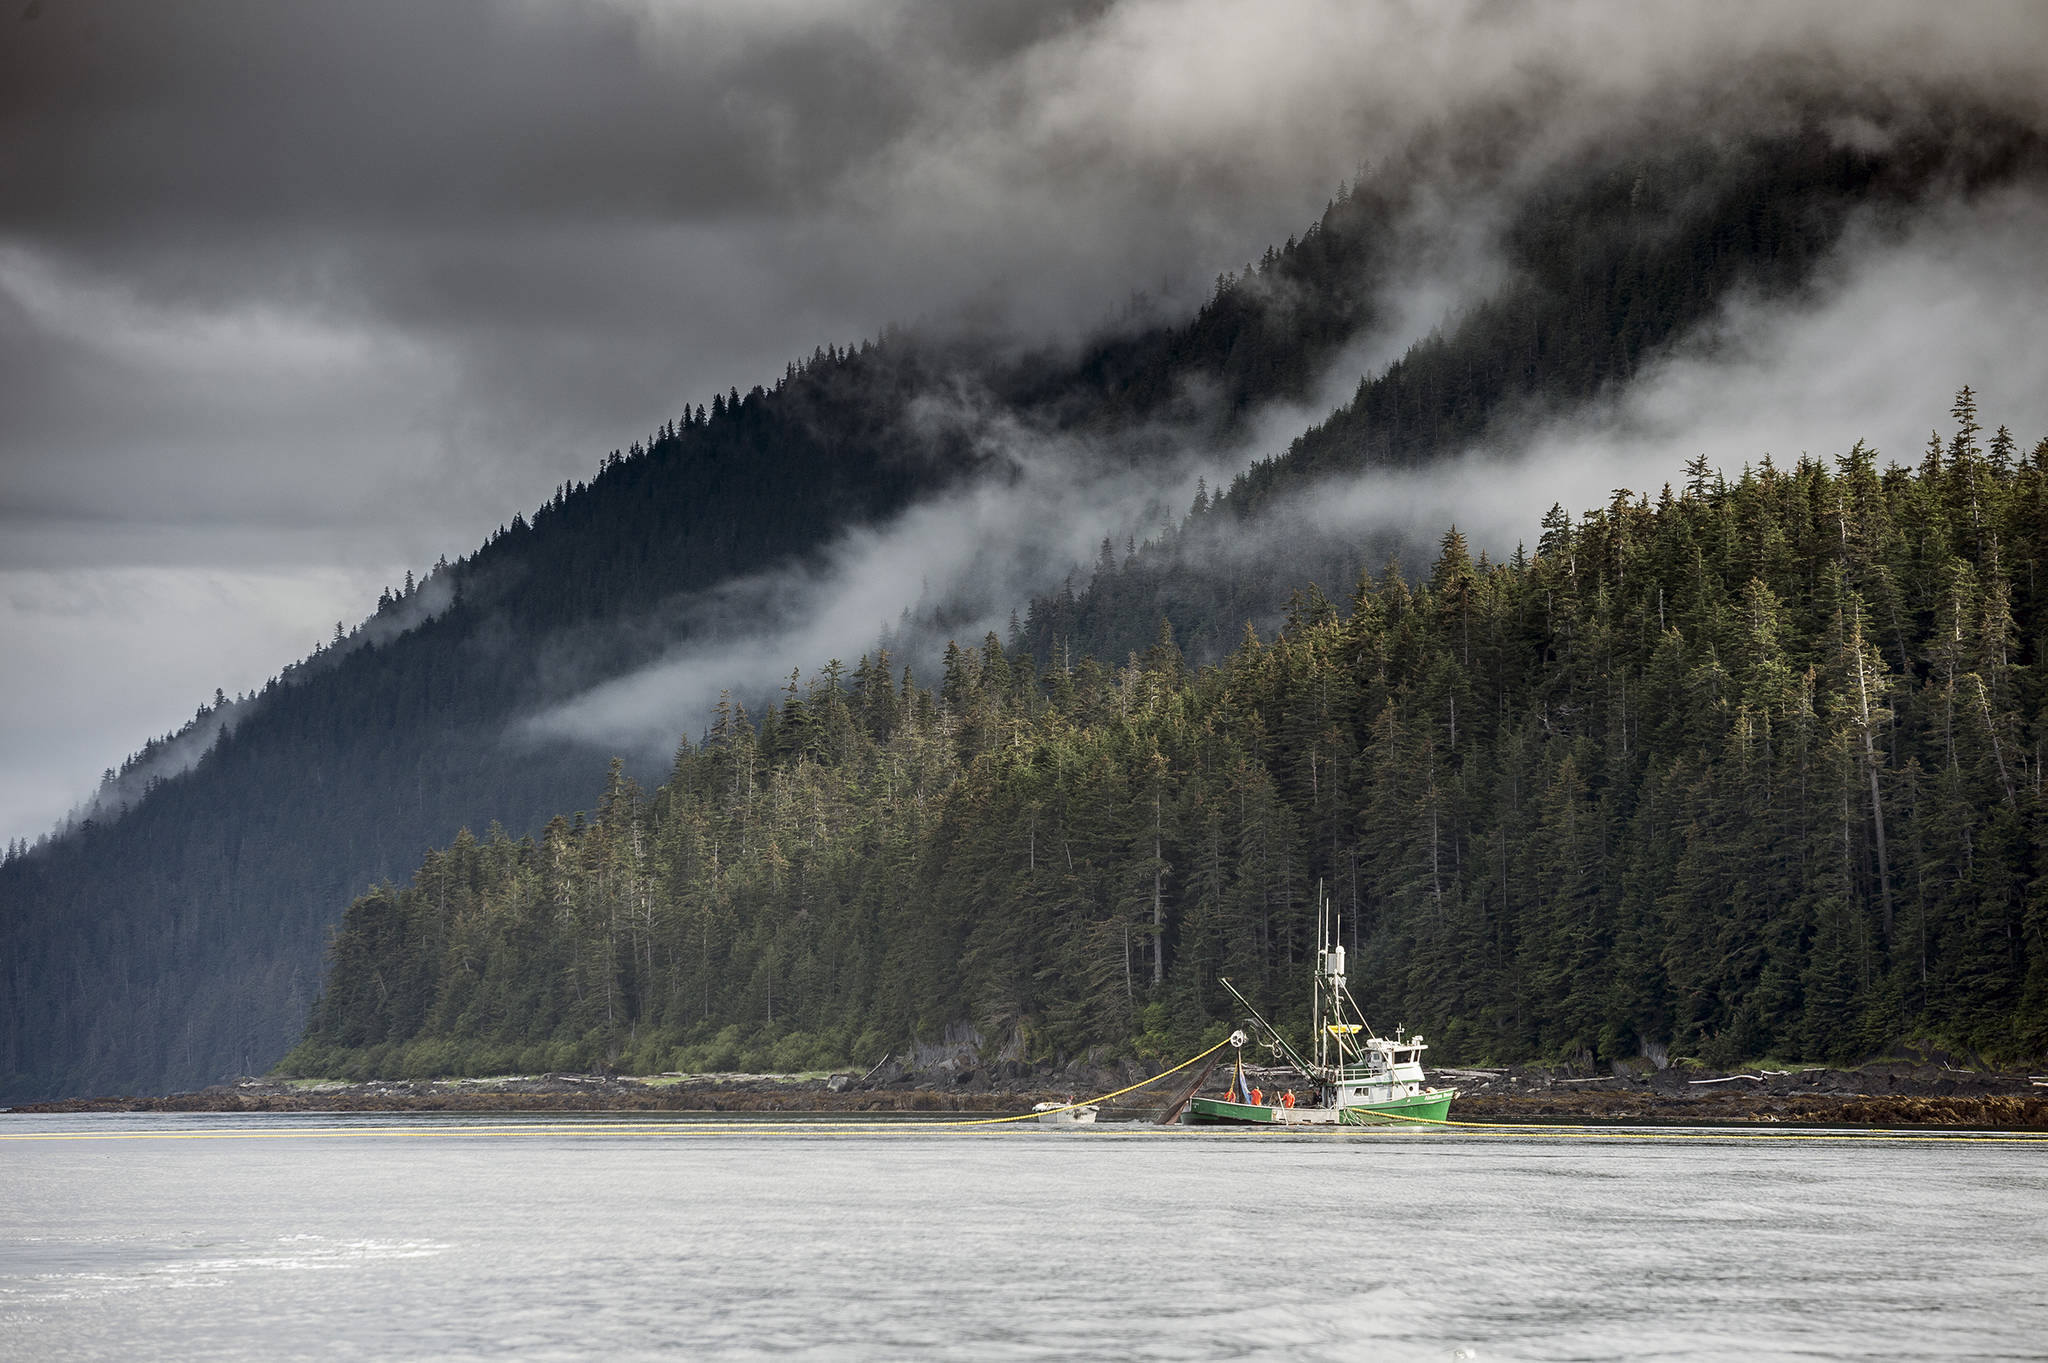 A seiner harvests salmon in the waters surrounding Southeast Alaska’s Tongass National Forest. On average, commercial fishermen catch an average of 48 million salmon born in the Tongass and the Chugach National Forests each year, for an annual average dockside value of $88 million. Scientists recently quantified the commercial value of Alaska’s “forest fish” for the first time. (Courtesy Photo | Chris Miller/csmphotos.com)